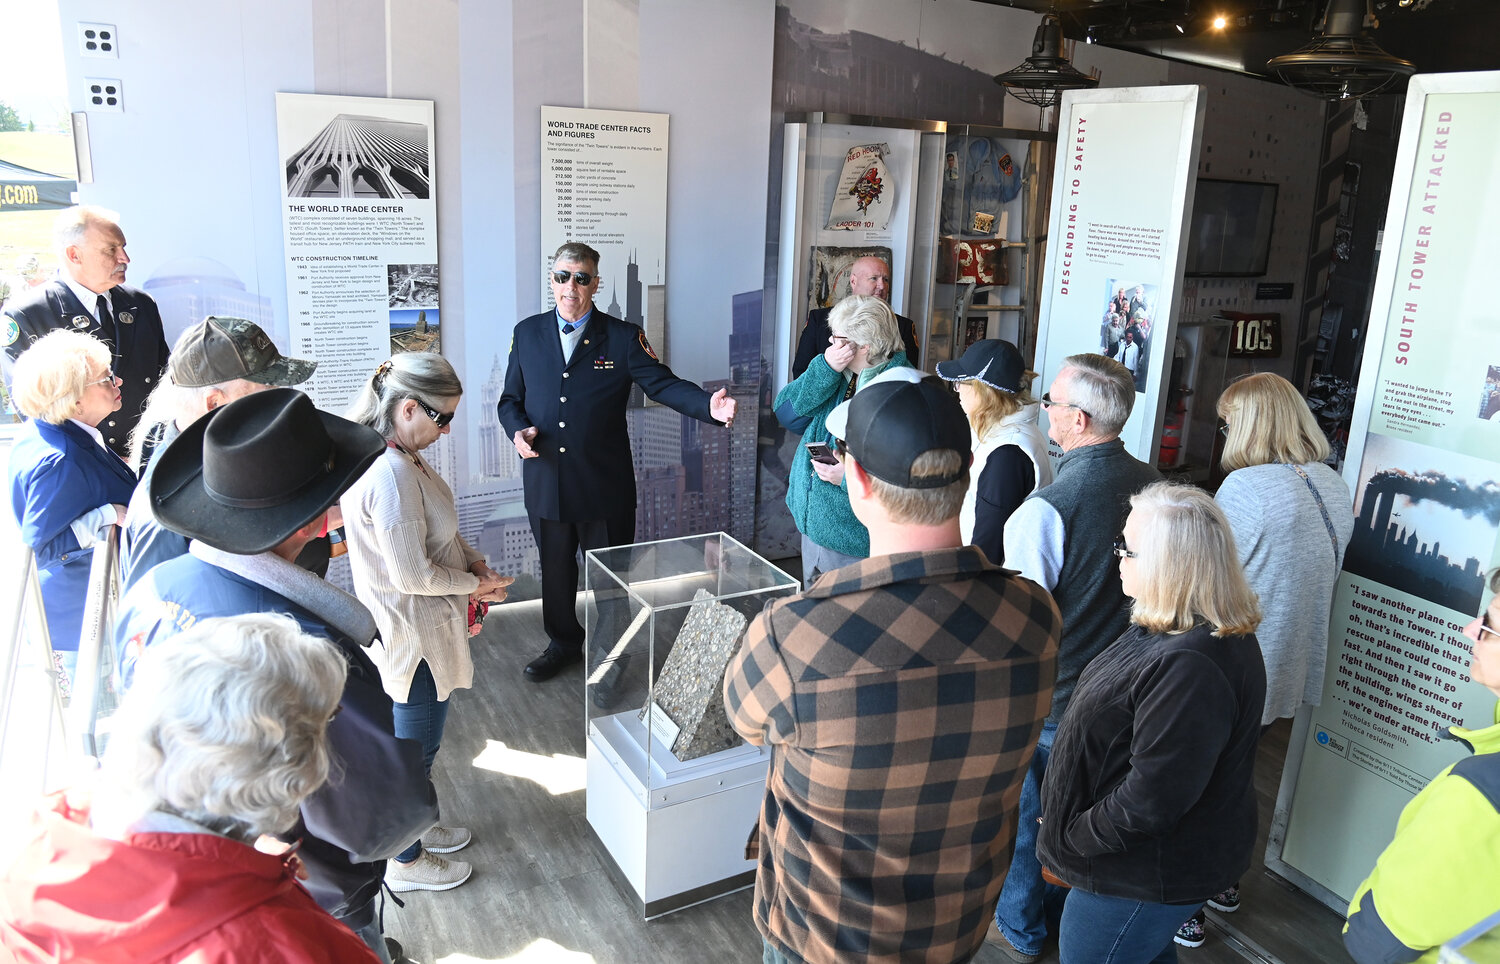 Retired NYC fireman Robert Reeg, who survived the injuries suffered when the towers collapsed on 9/11, gives a tour of the artifacts Thursday on the opening of the 9/11 Never Forget Mobile Exhibit at the Griffiss Business and Technology Park.